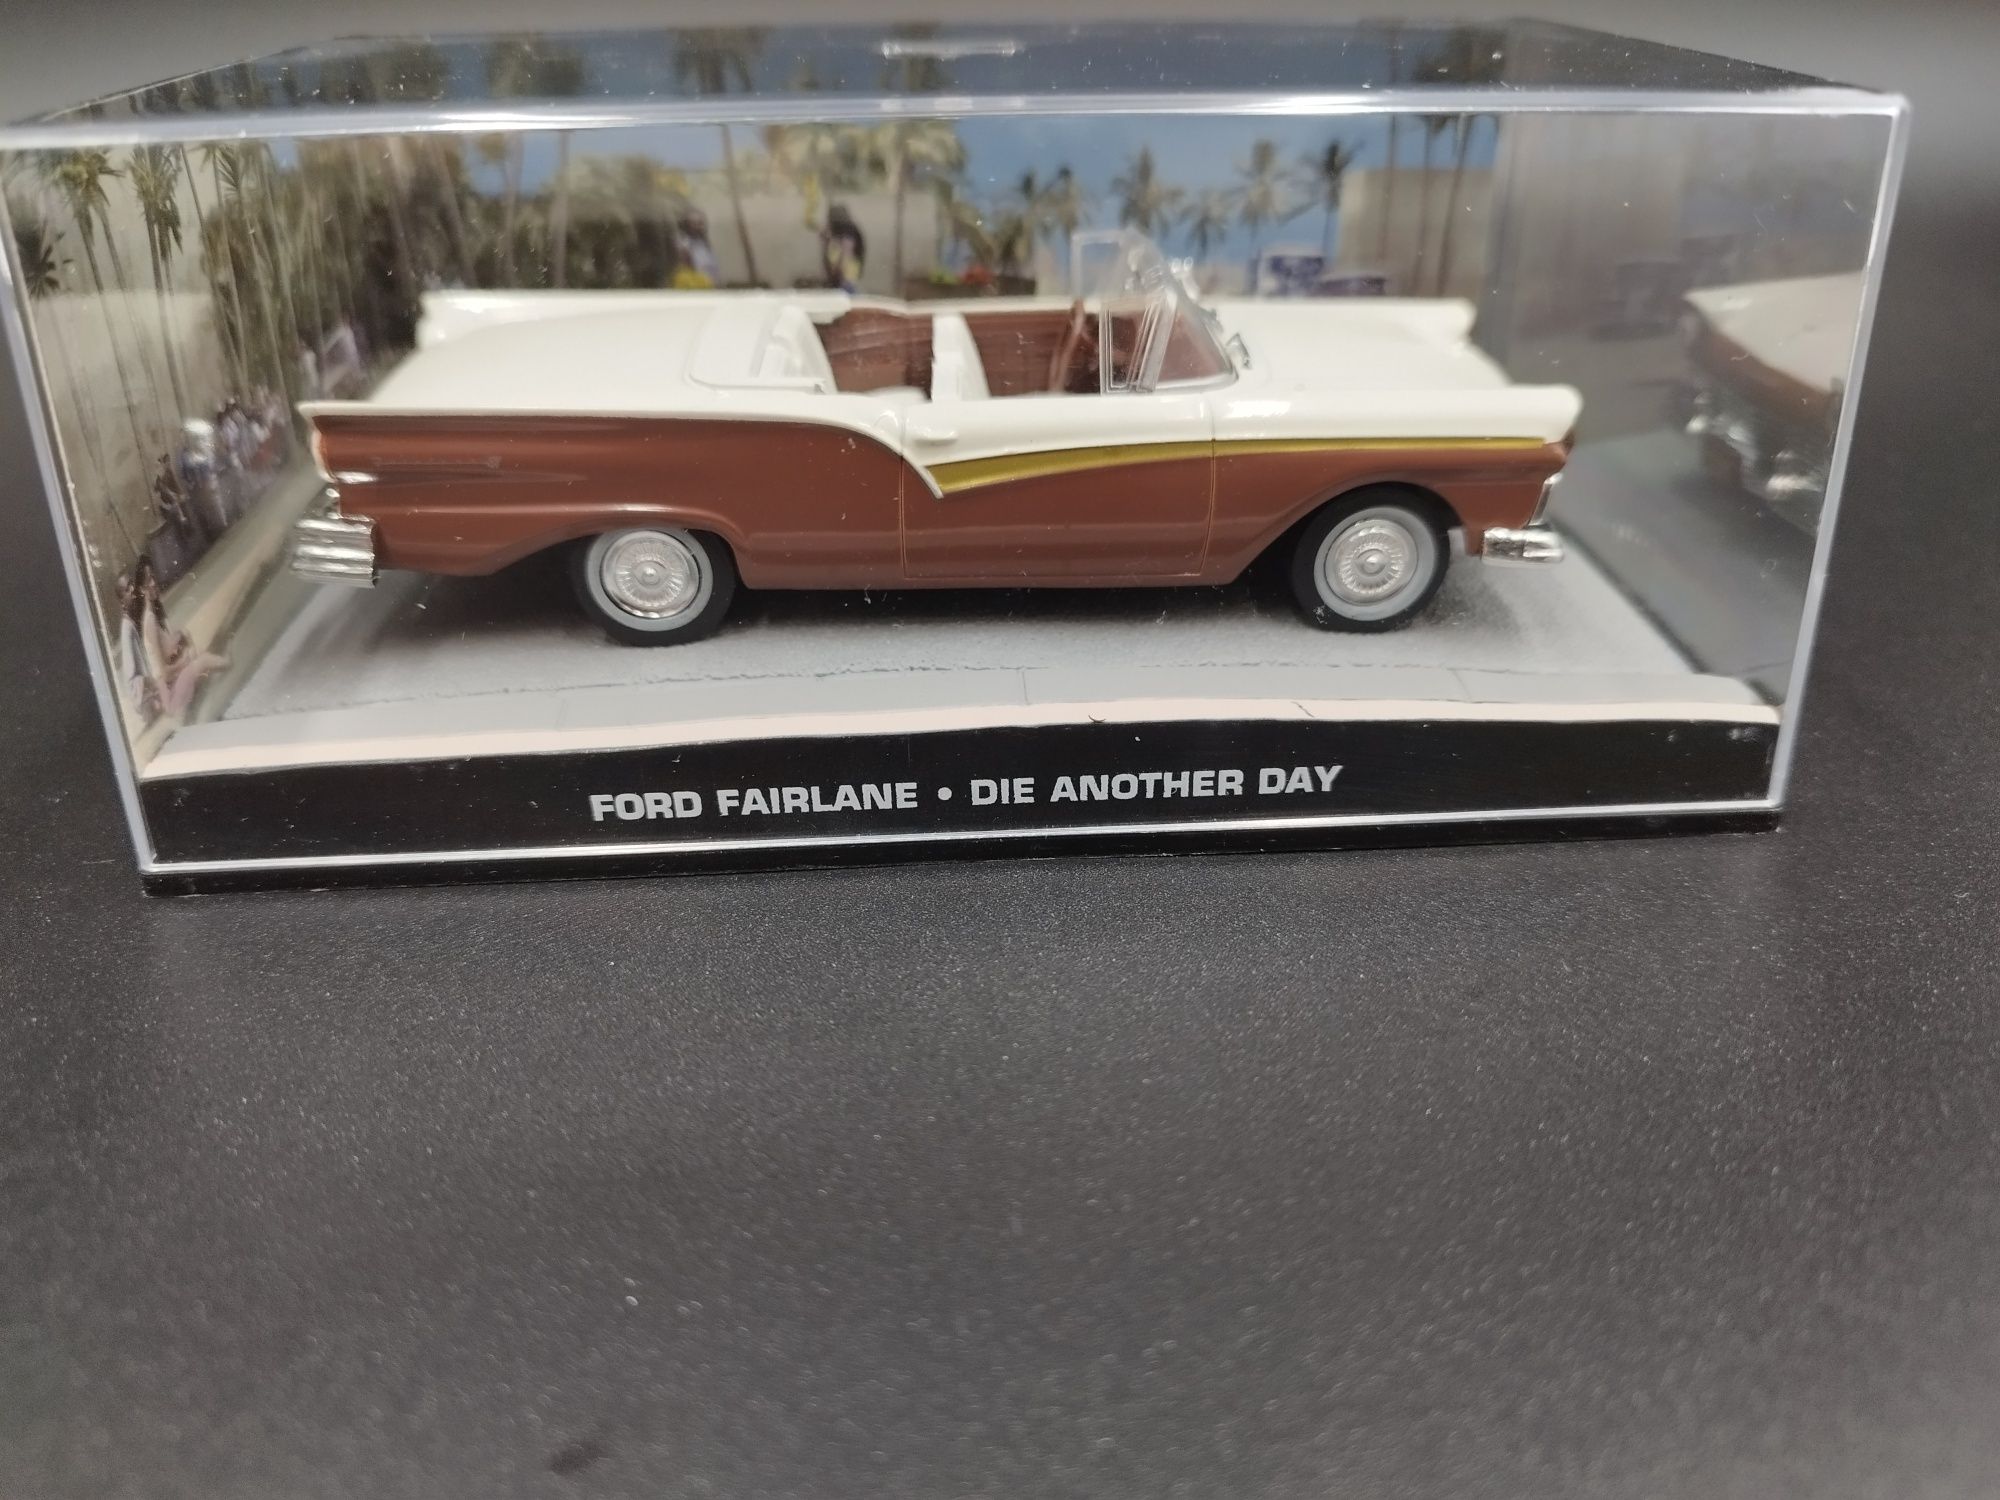 1:43 Ford Fairlane James Bond 007 Die Another Day model